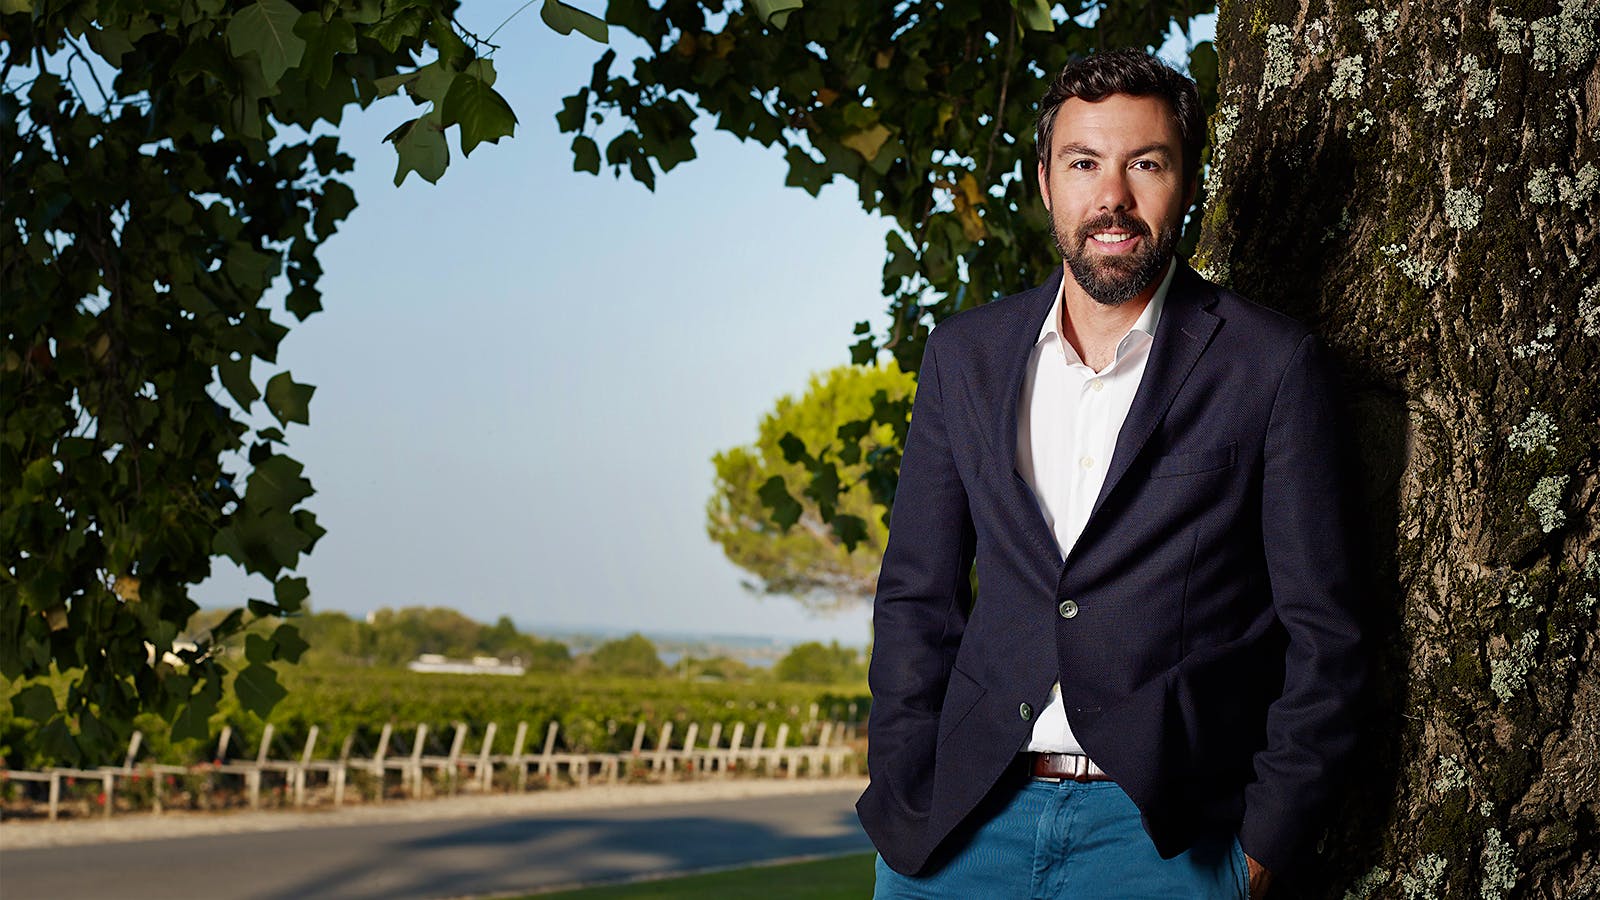 Bordeaux Looks to the Future: A Live Chat with Château Lynch Bages’ Jean-Charles Cazes